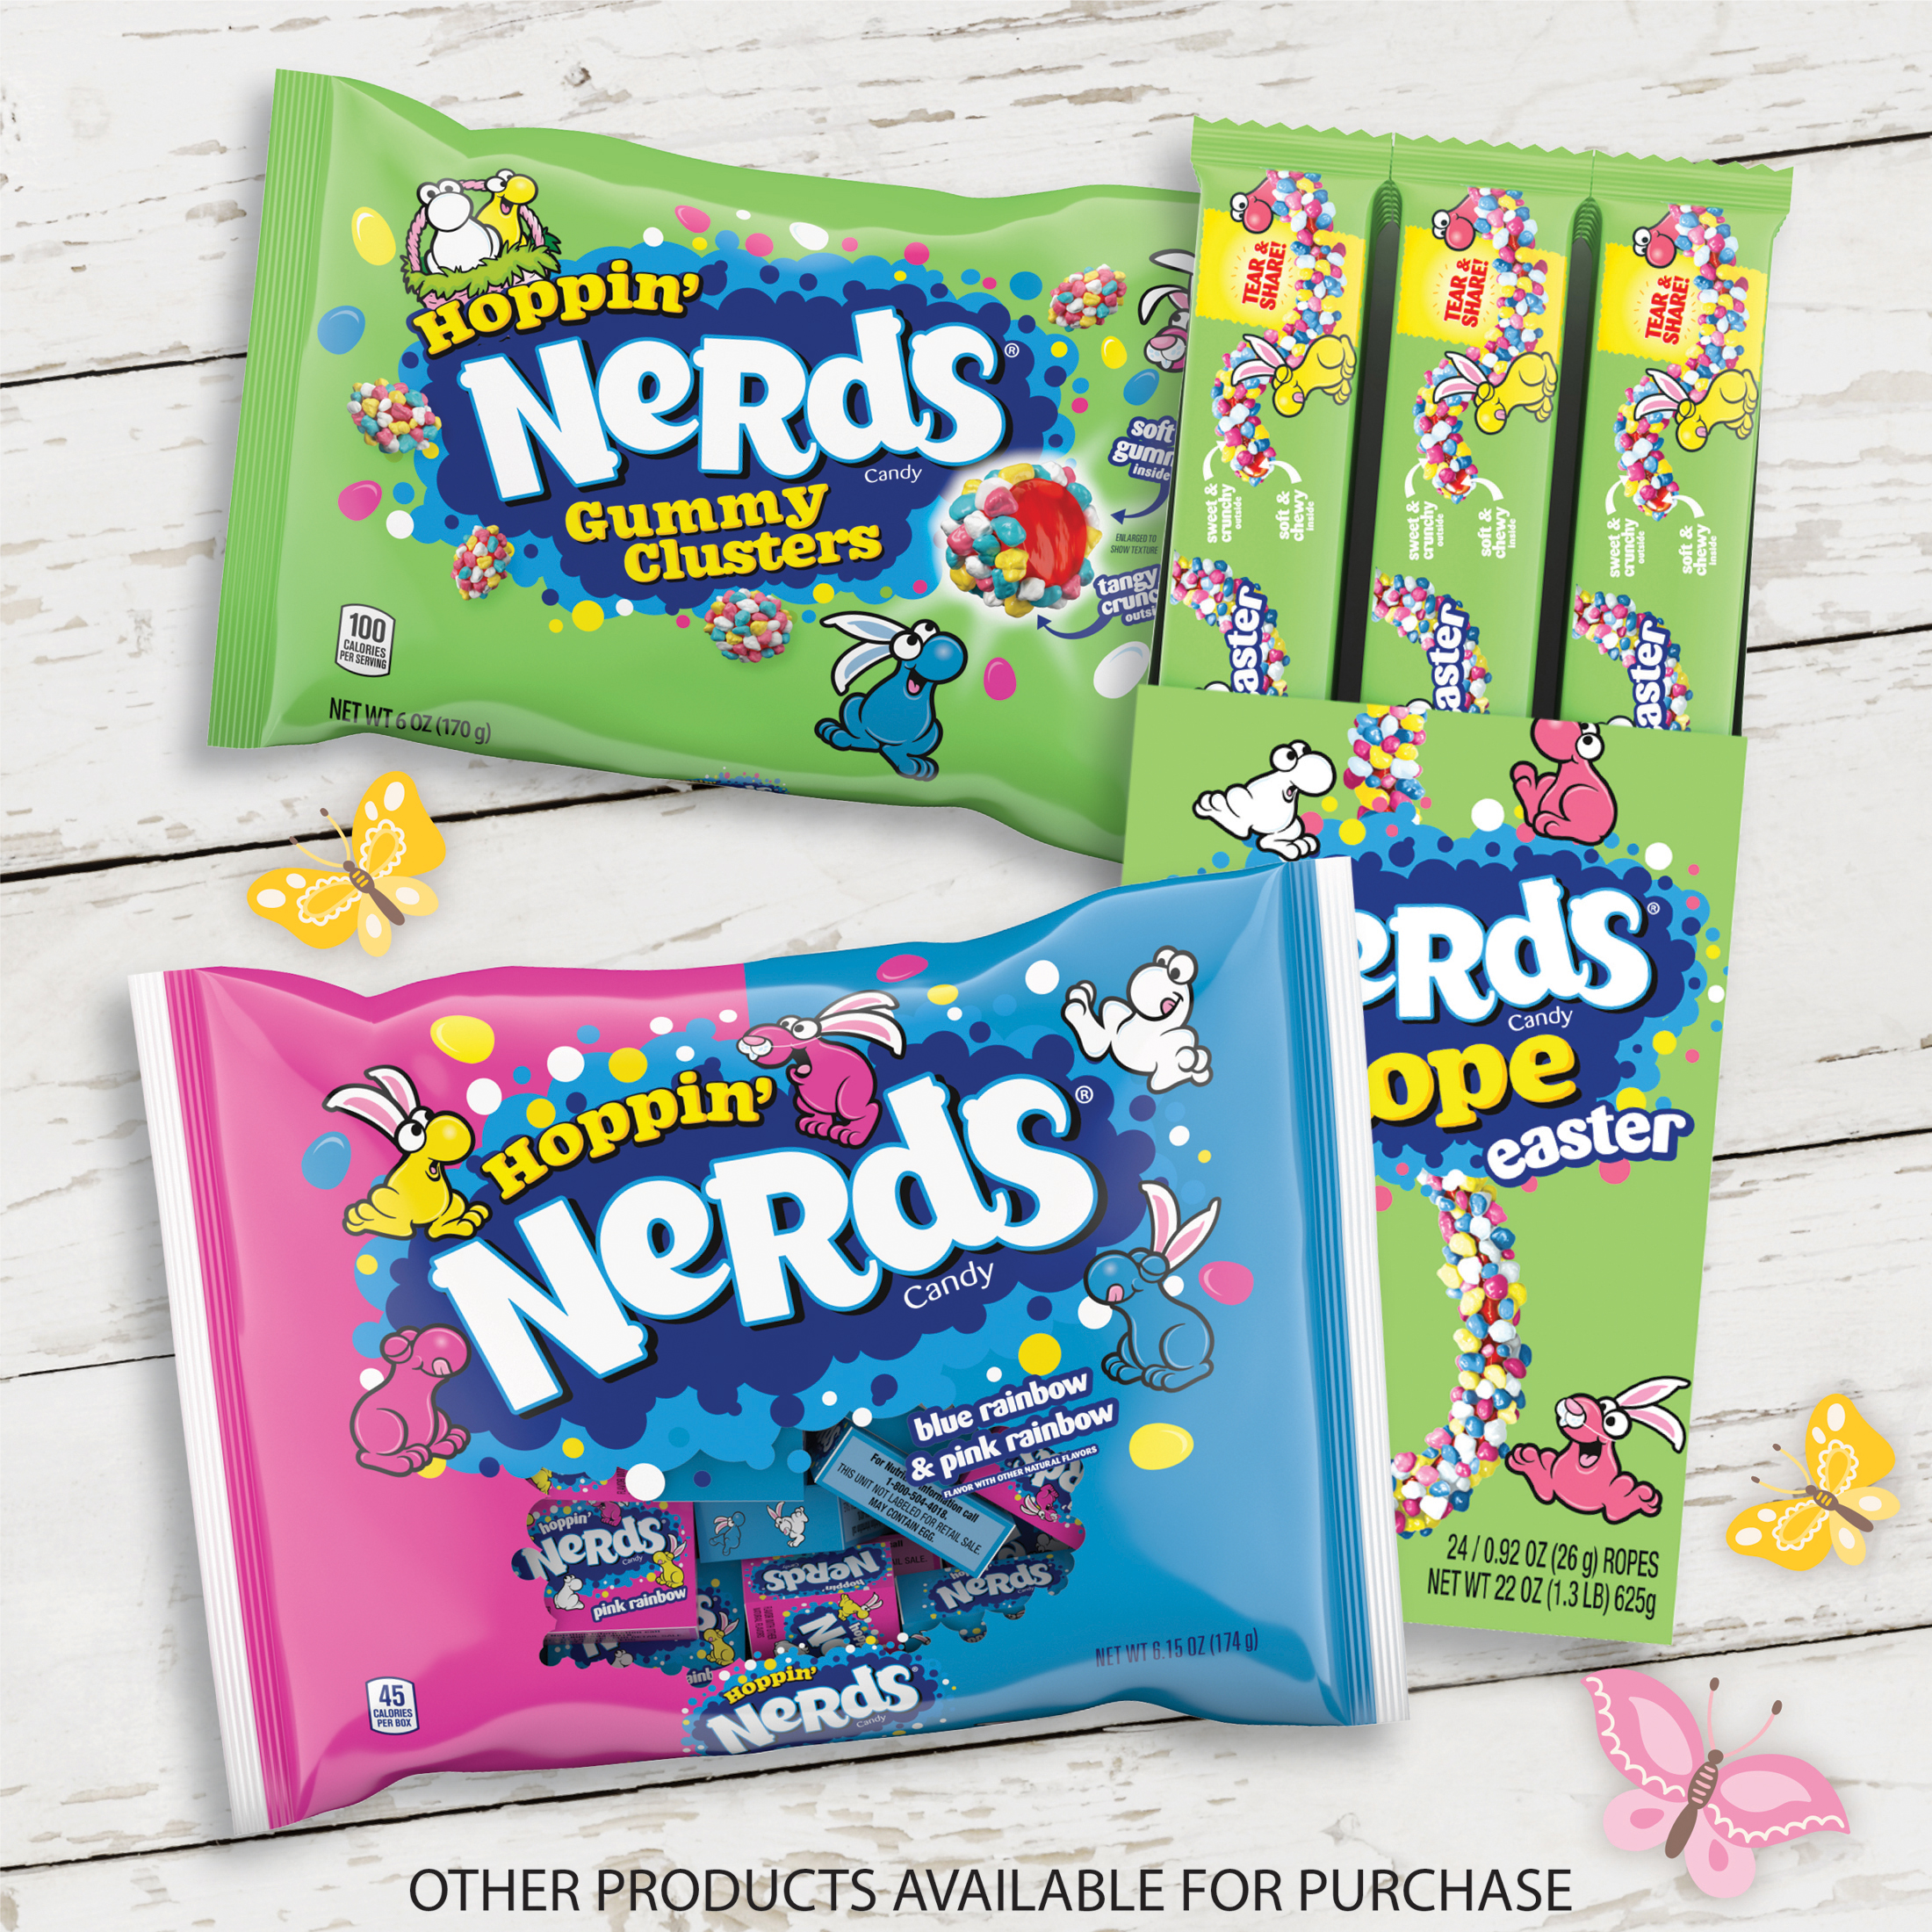 Nerds Rainbow Hoppin' Easter Fruit Flavored Candy Mini Boxes, 6.15 oz - image 4 of 7